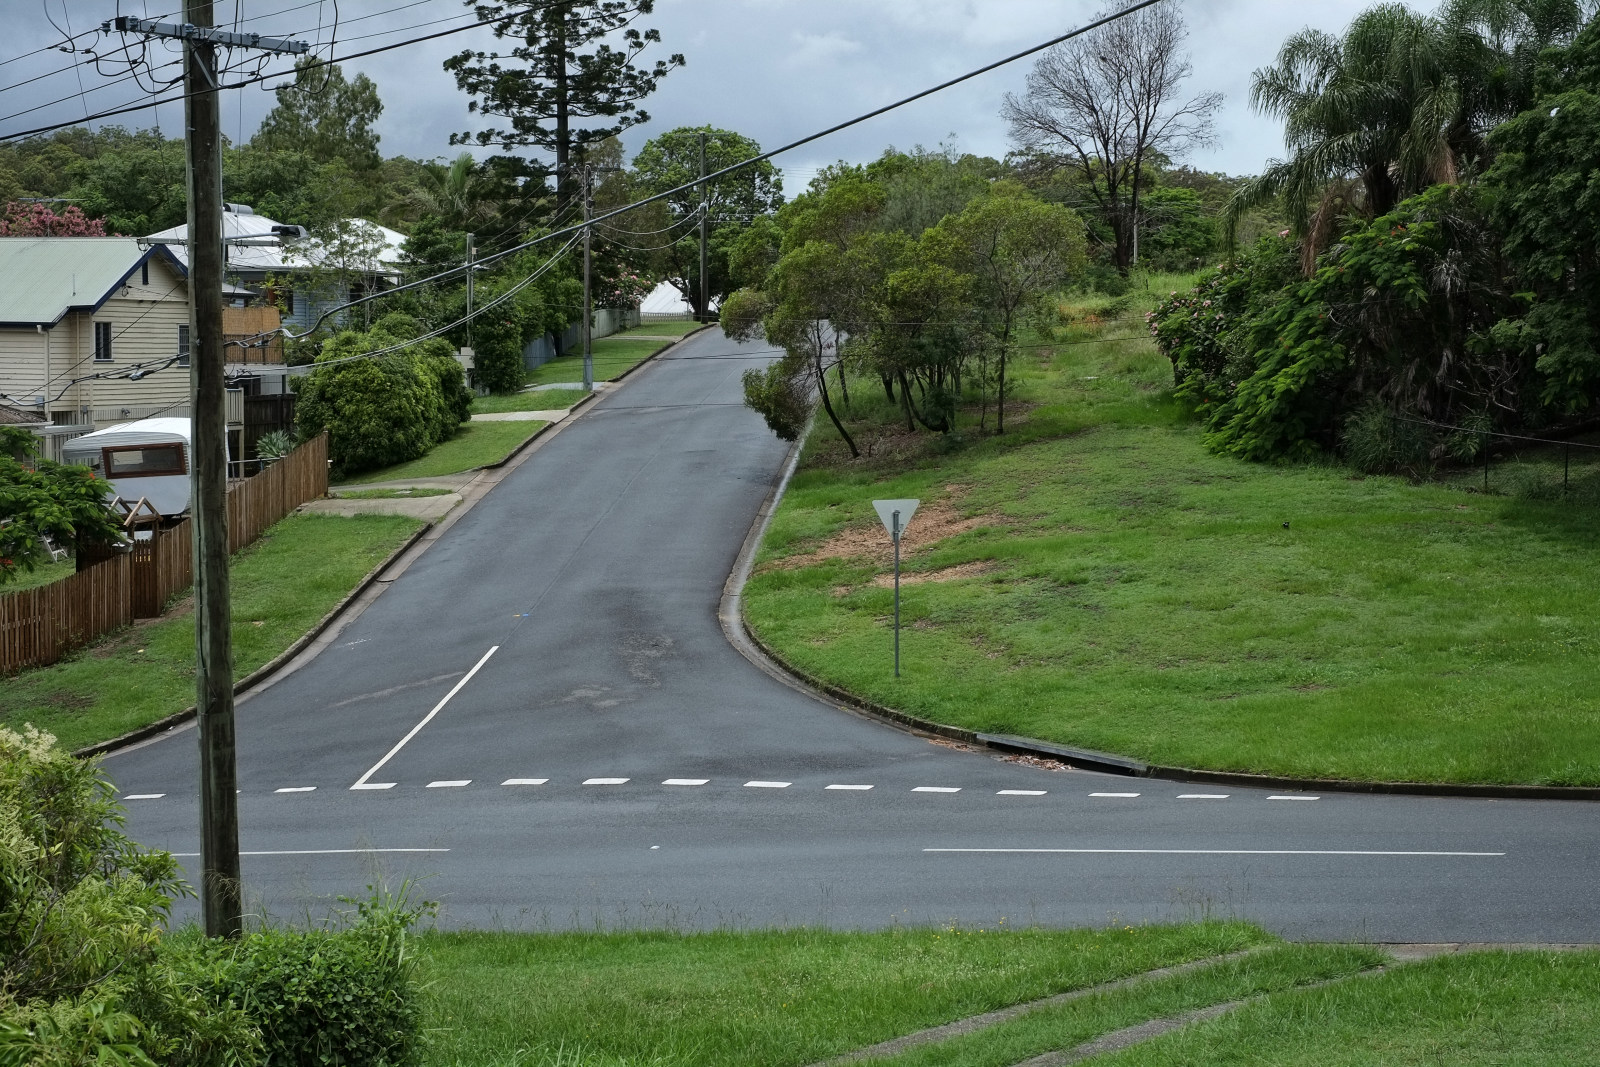 Wide roads and an even wider grassy unimproved sidewalk, Seven Hills Bushland Reserve in the background at the end of the street. Photographed by Kent Johnson.